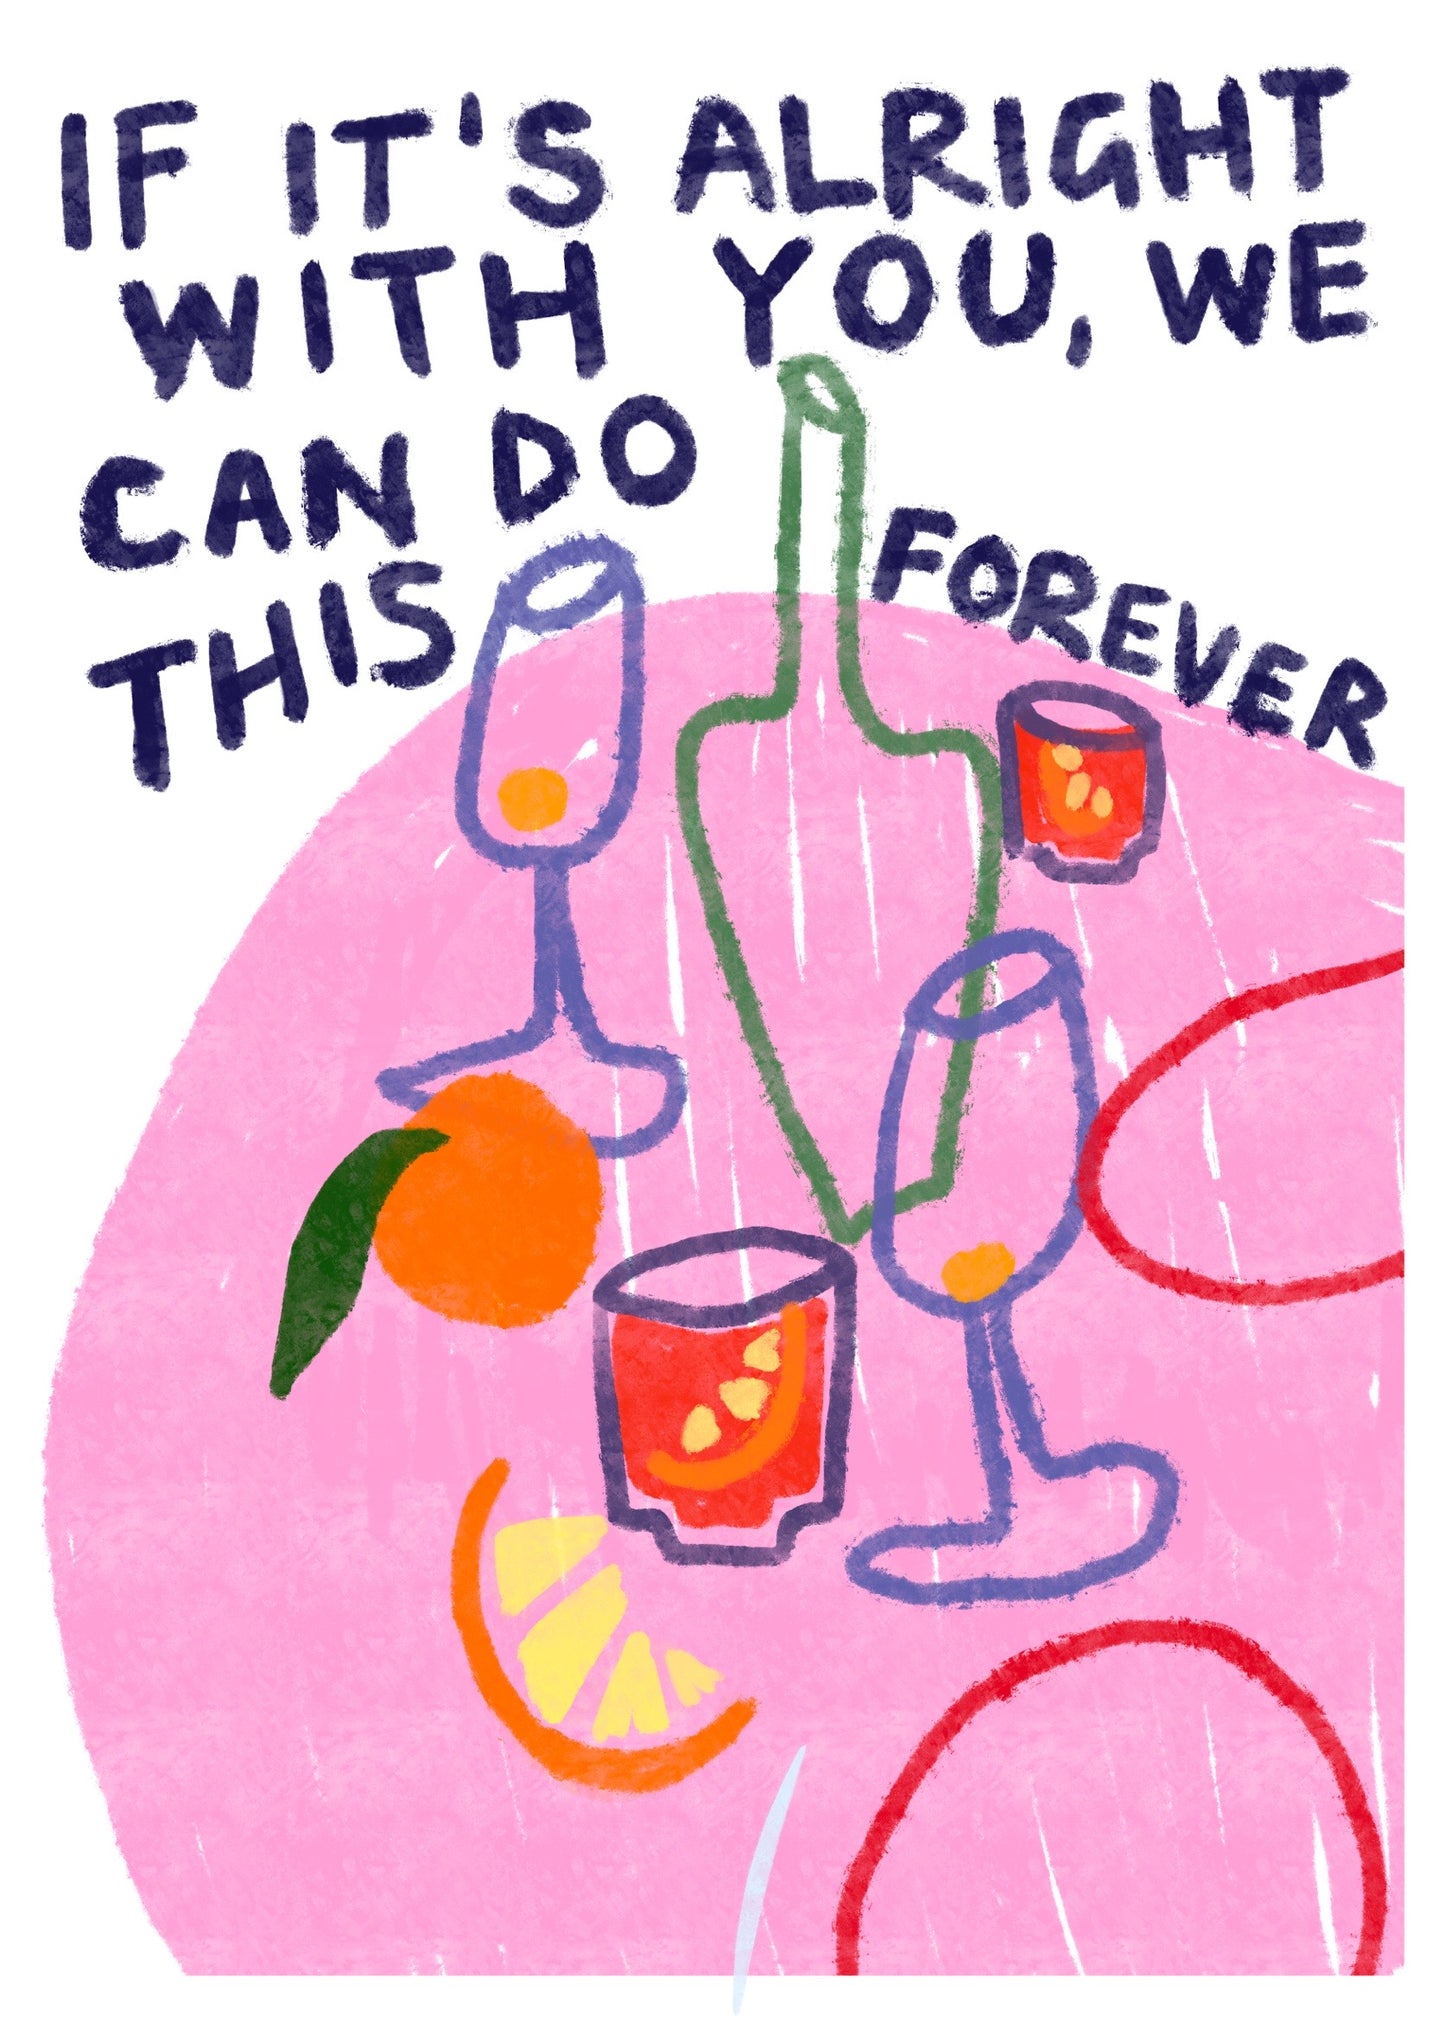 We Can Do This Forever print